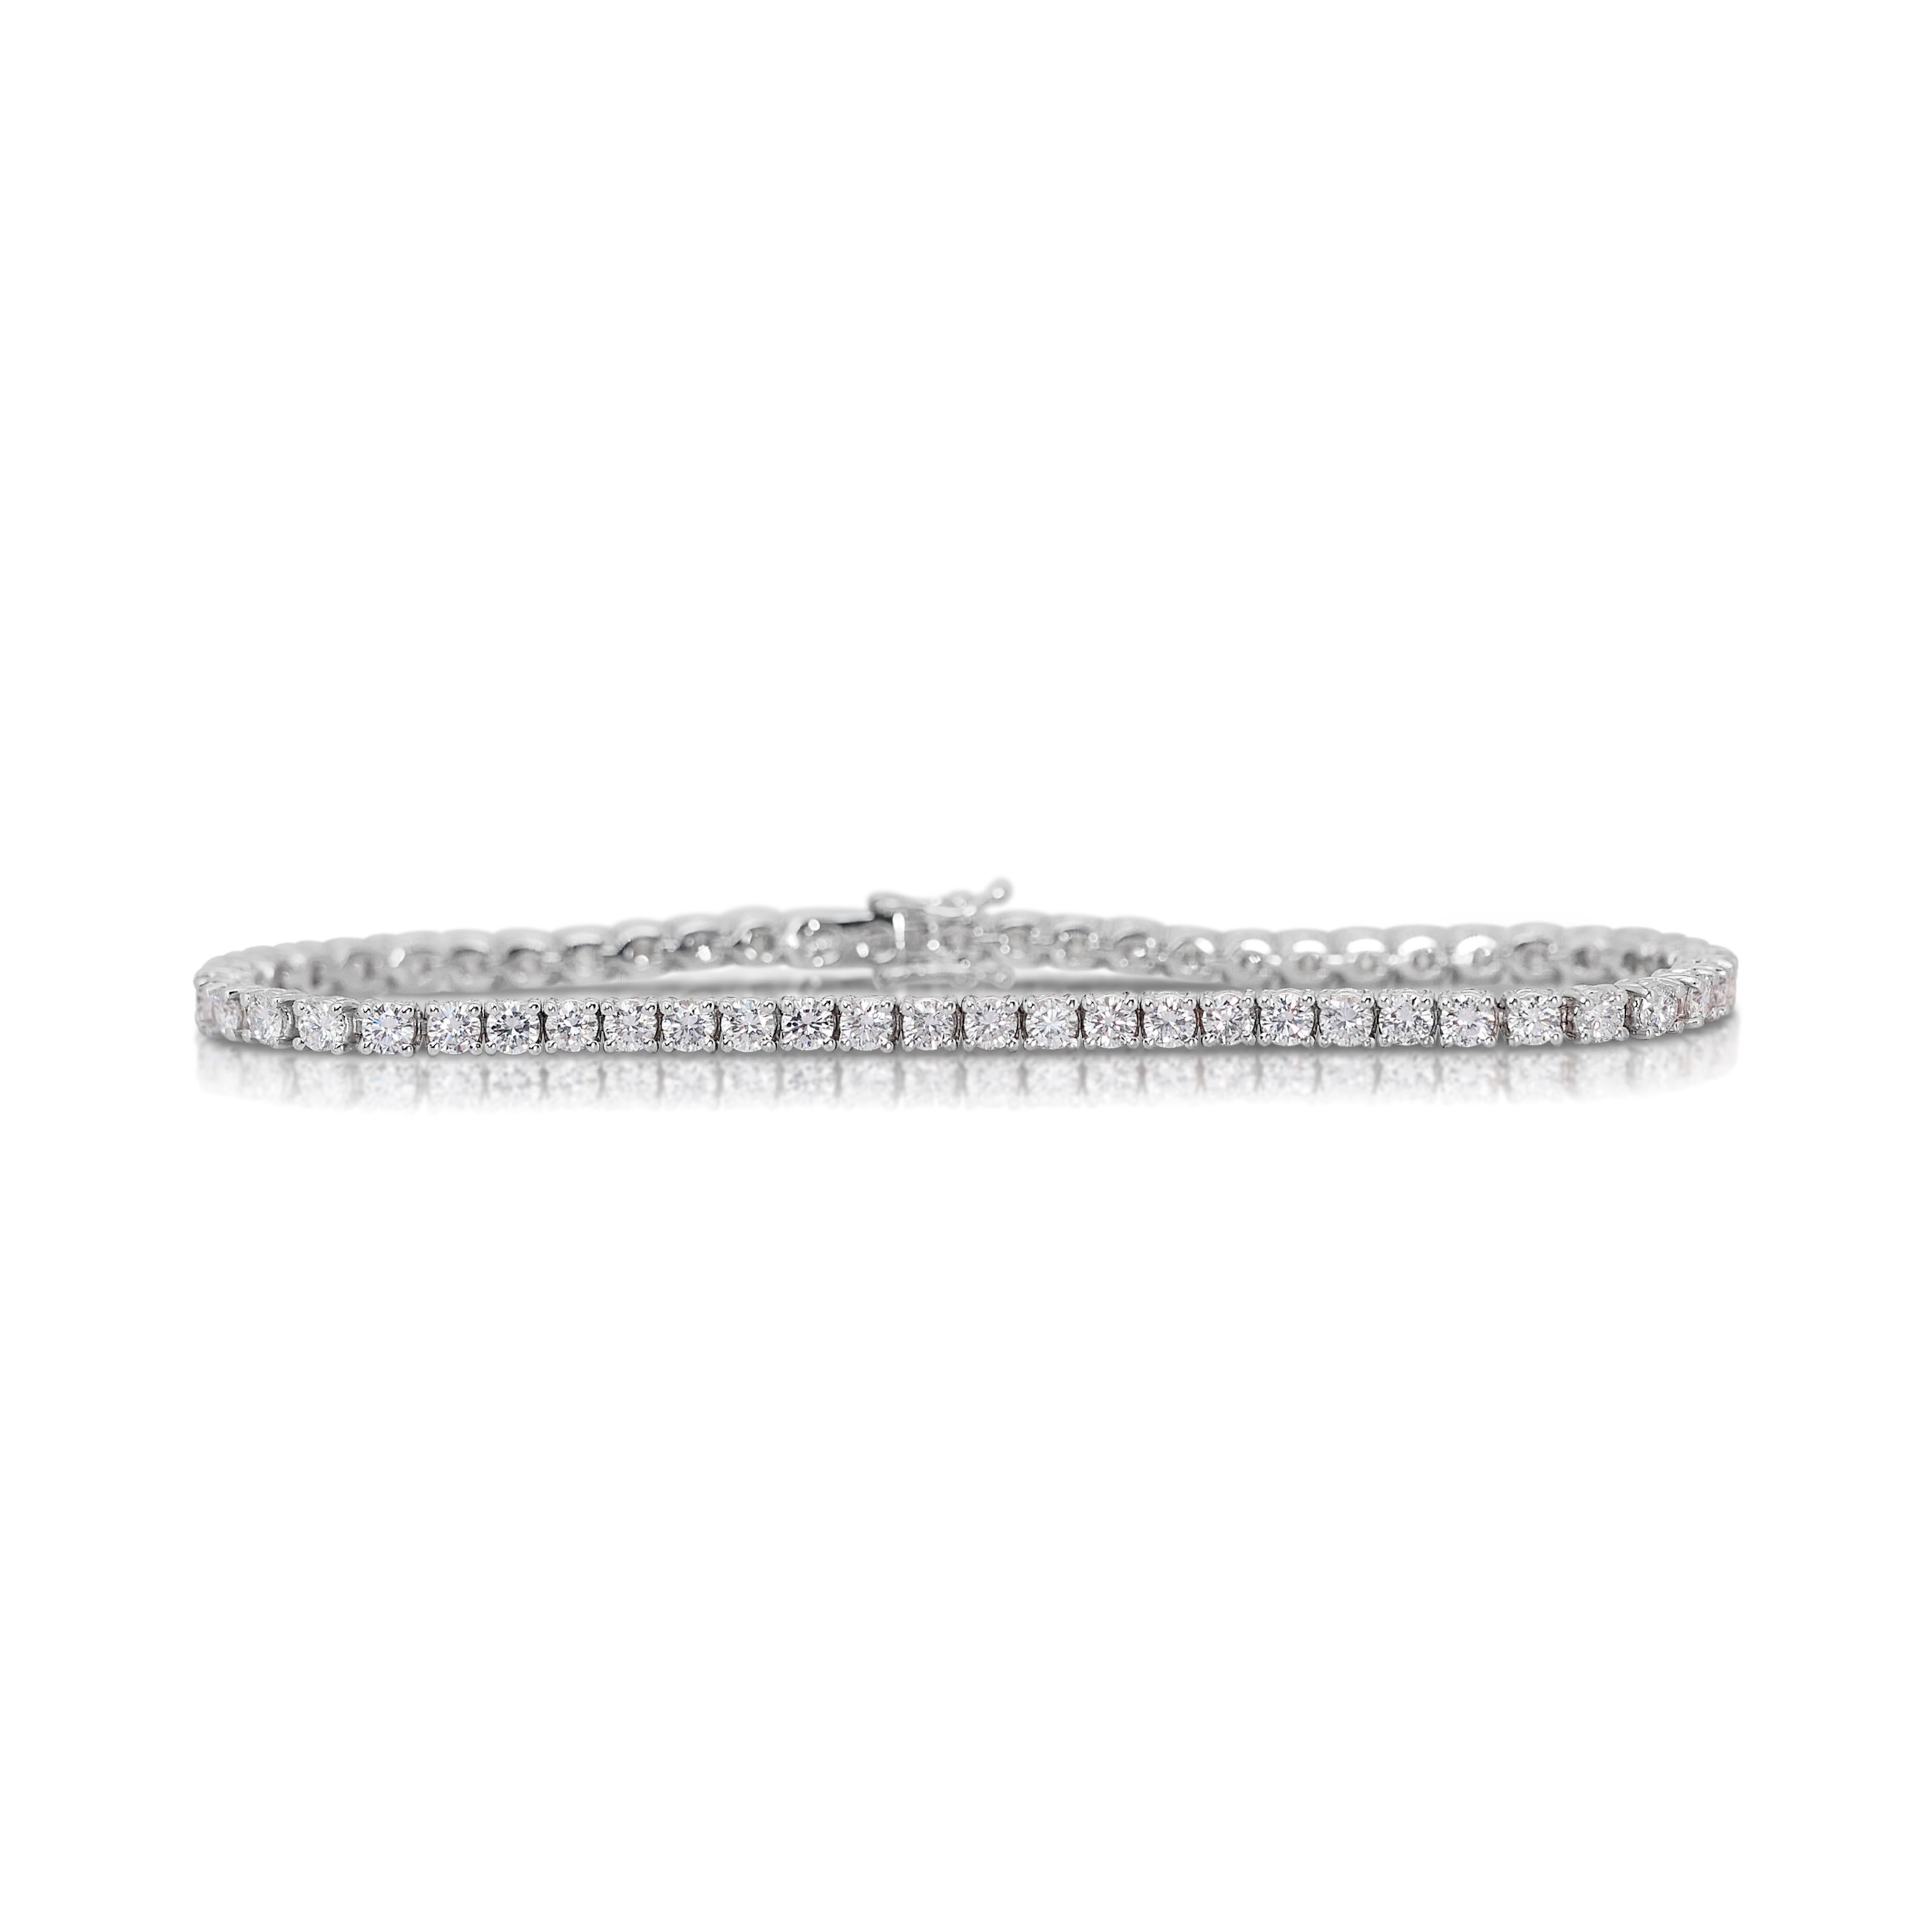 Radiant 5.32ct Diamonds Tennis Bracelet in 14k White Gold - IGI Certified

Introducing this elegant tennis bracelet, a masterpiece designed to dazzle and delight. This luxurious accessory showcases 56 brilliant round diamonds, collectively weighing